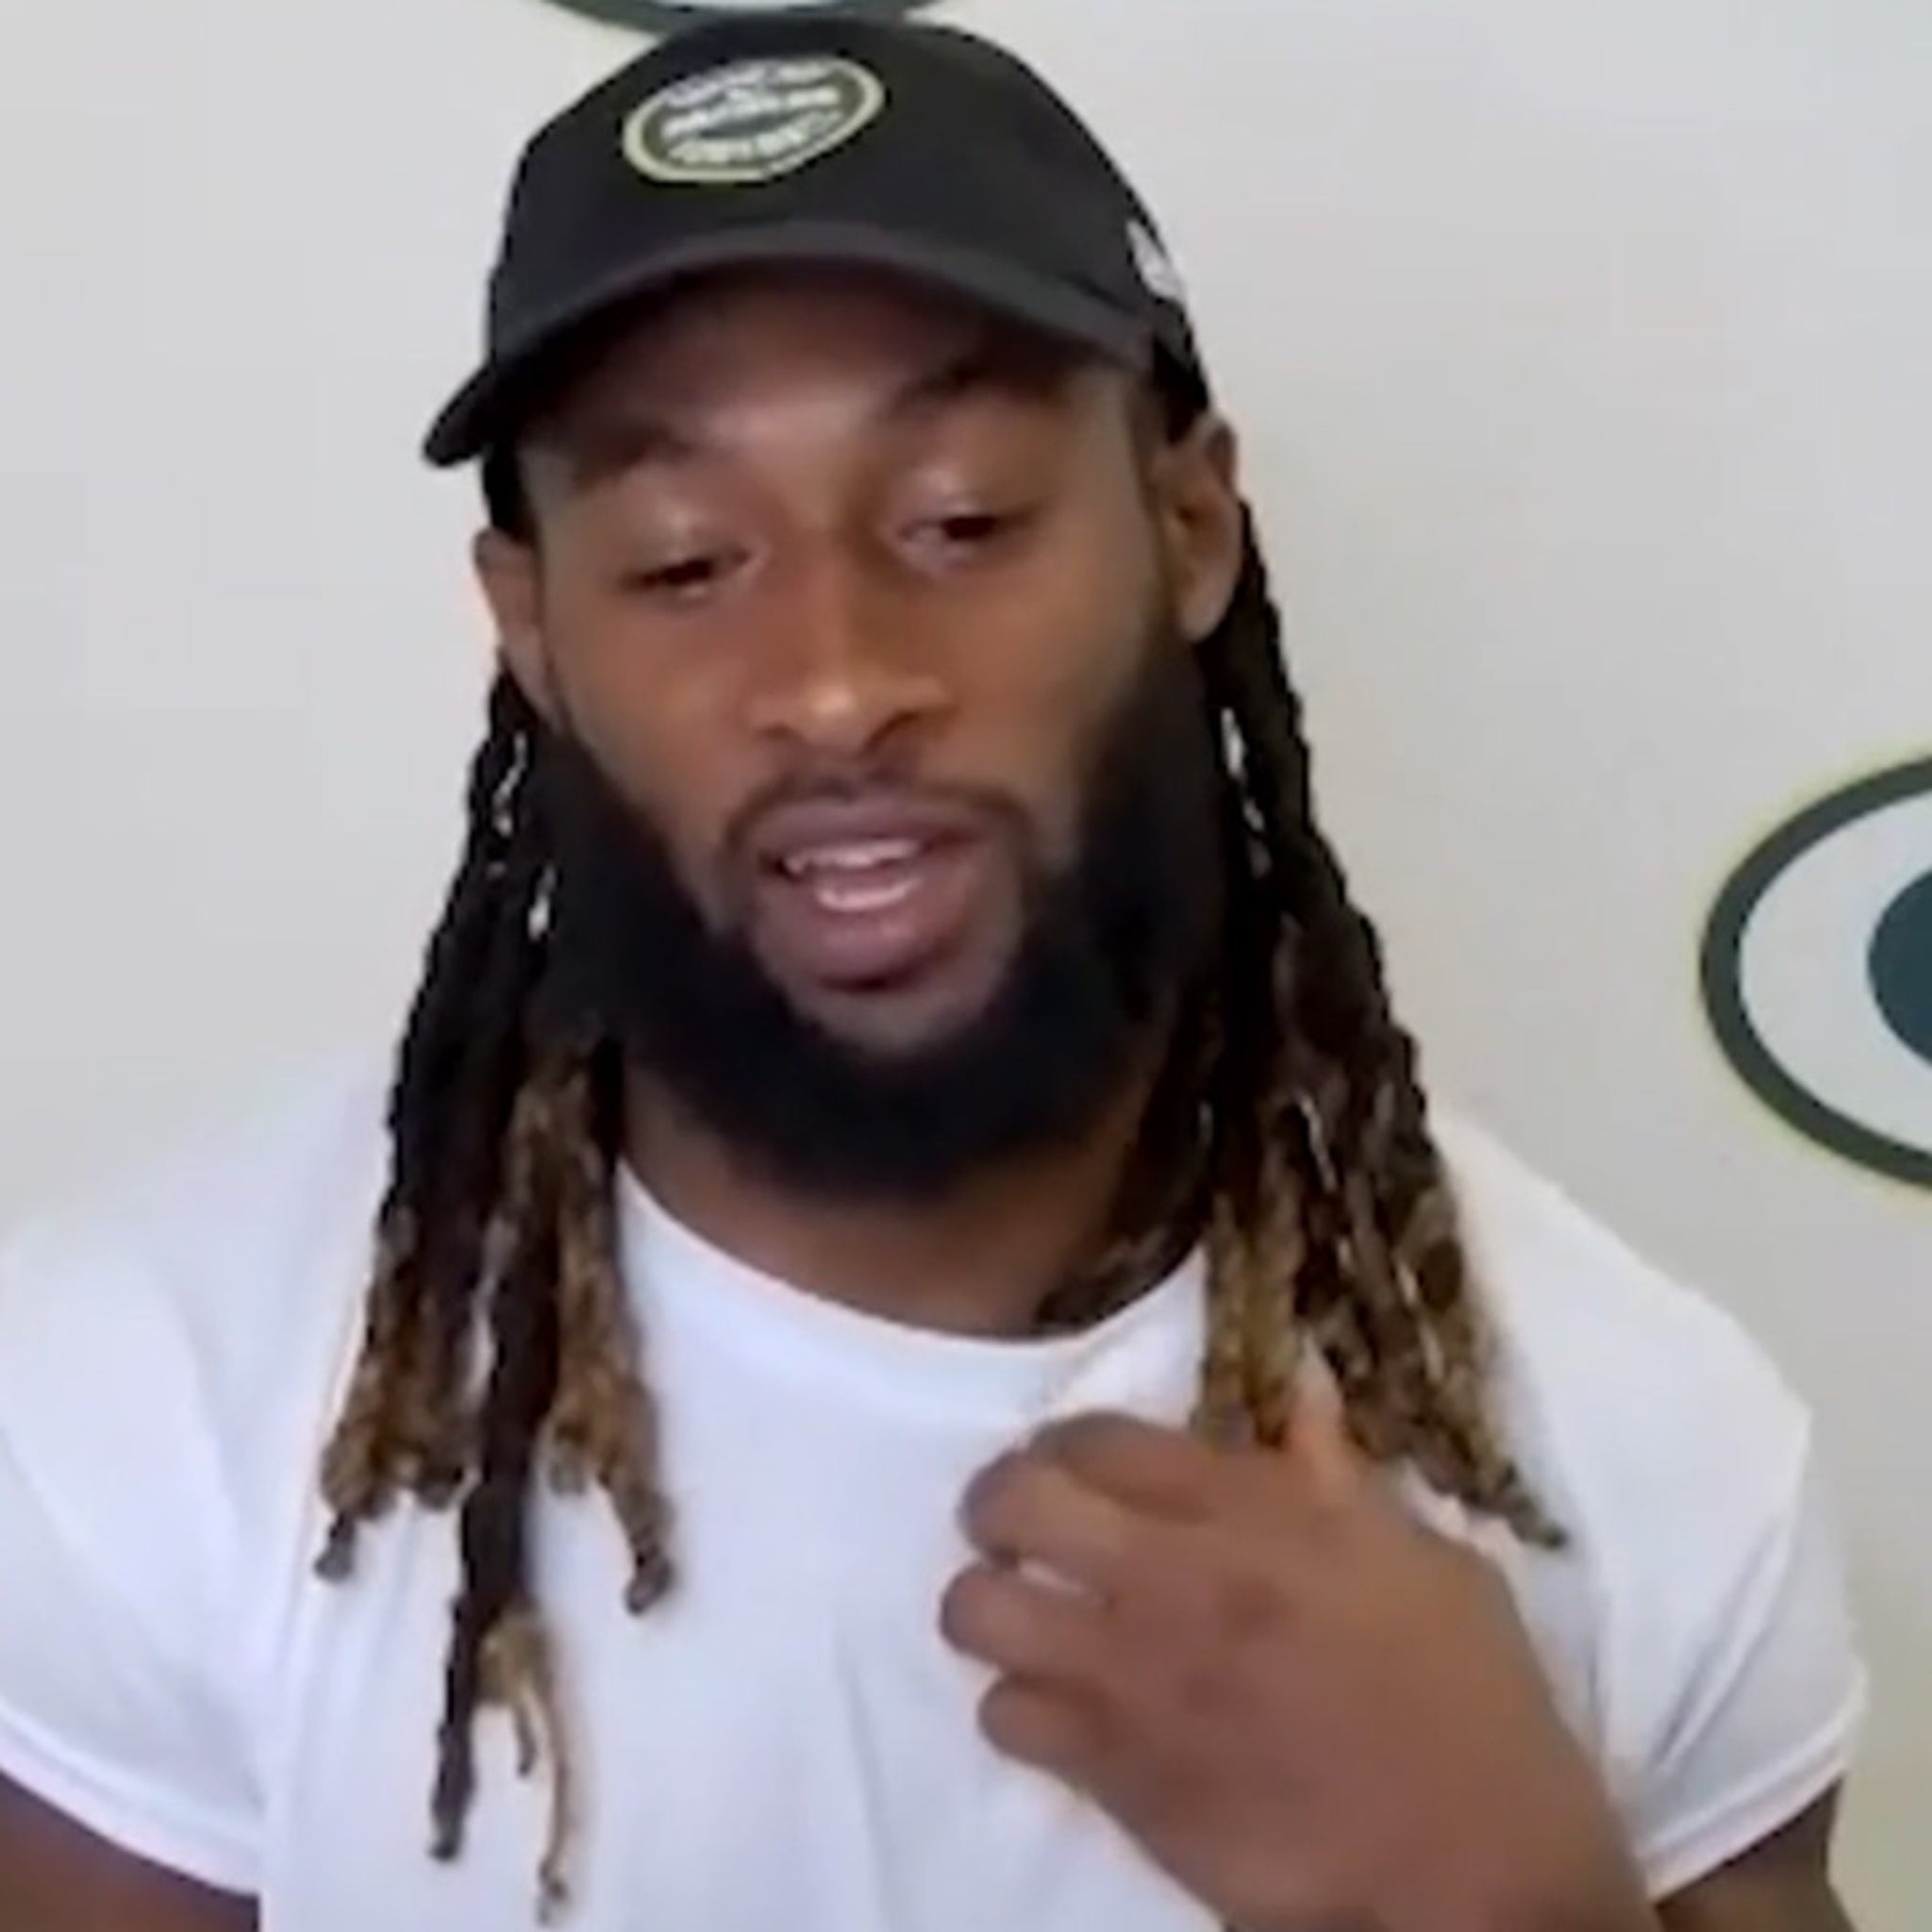 Packers RB Aaron Jones has pocket in jersey to carry father's ashes